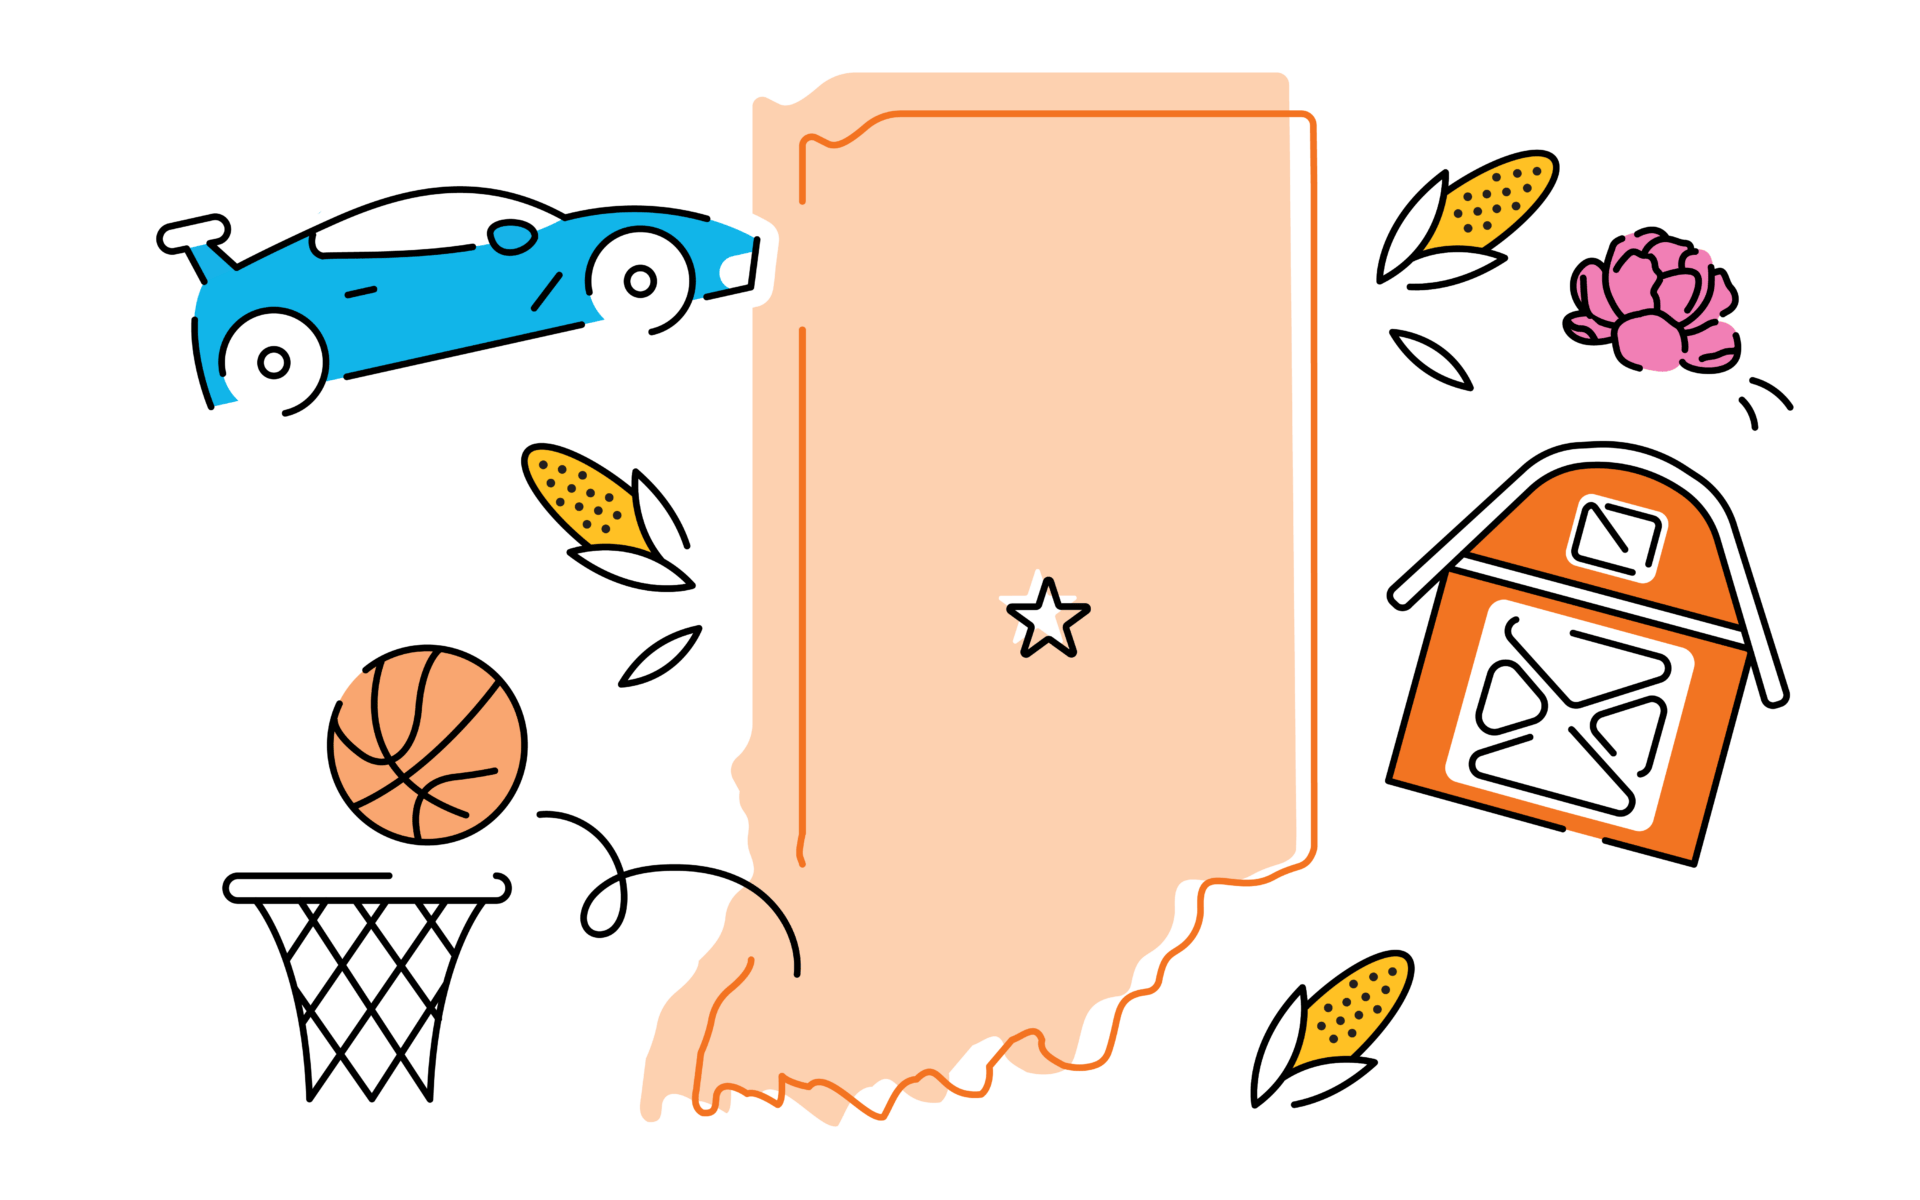 Illustration featuring assorted icons including a blue car, basketball hoop, a barn, and a scroll with a star, surrounded by leaves and a flower.